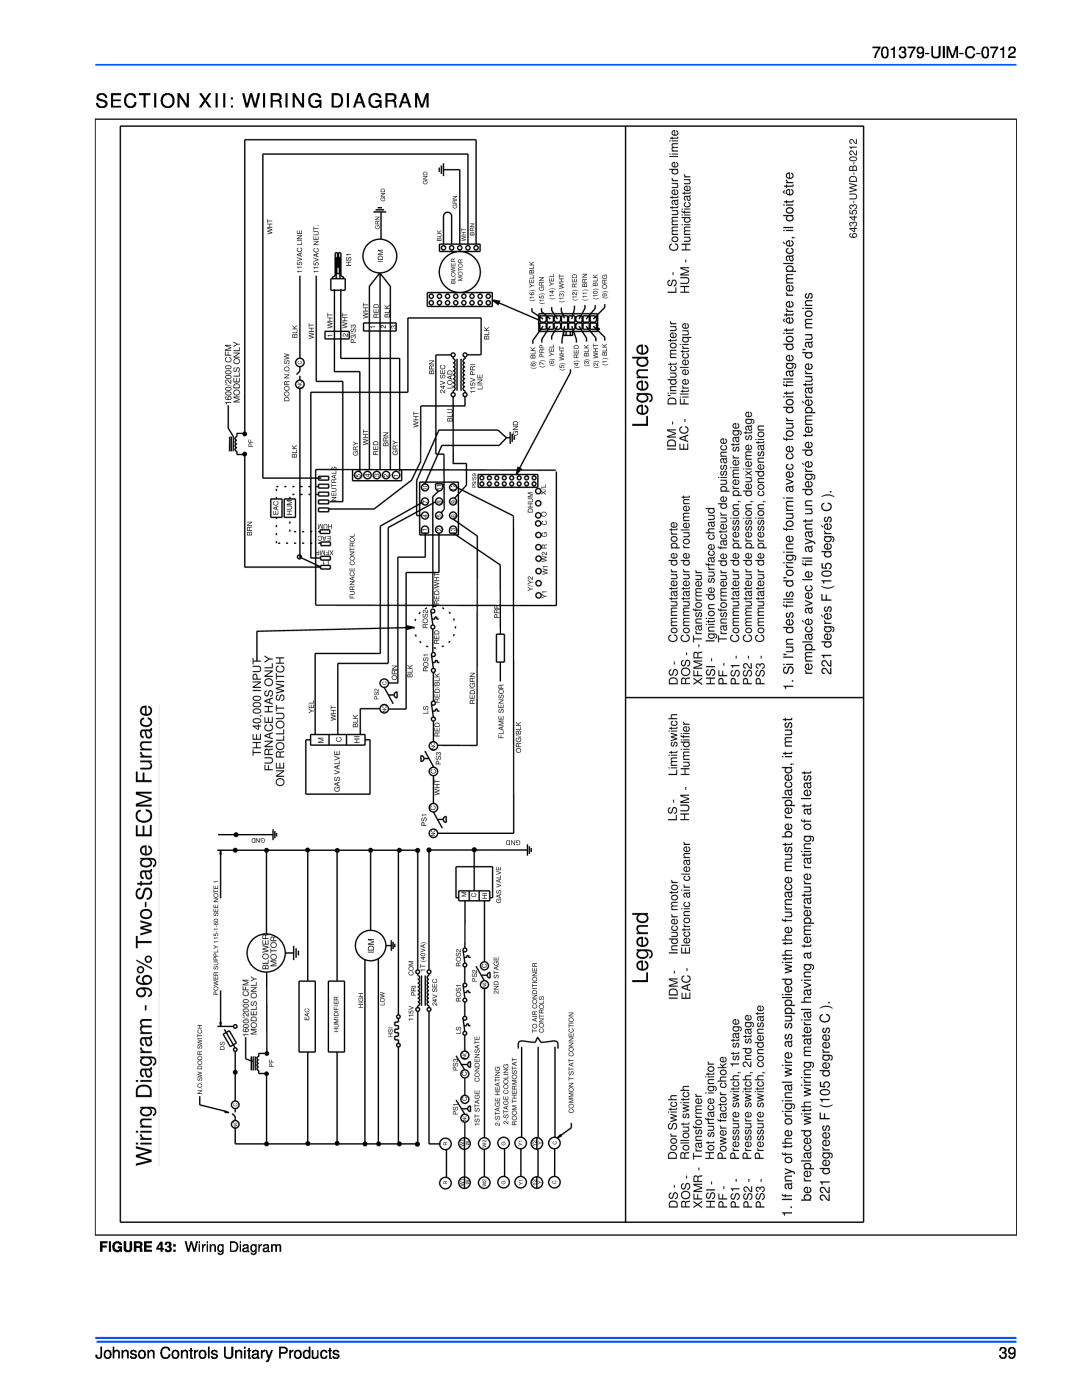 Johnson Controls TM9V*MP Wiring Diagram - 96% Two-StageECM Furnace, Legende, Xii Wiring, Section, Unitary Products 